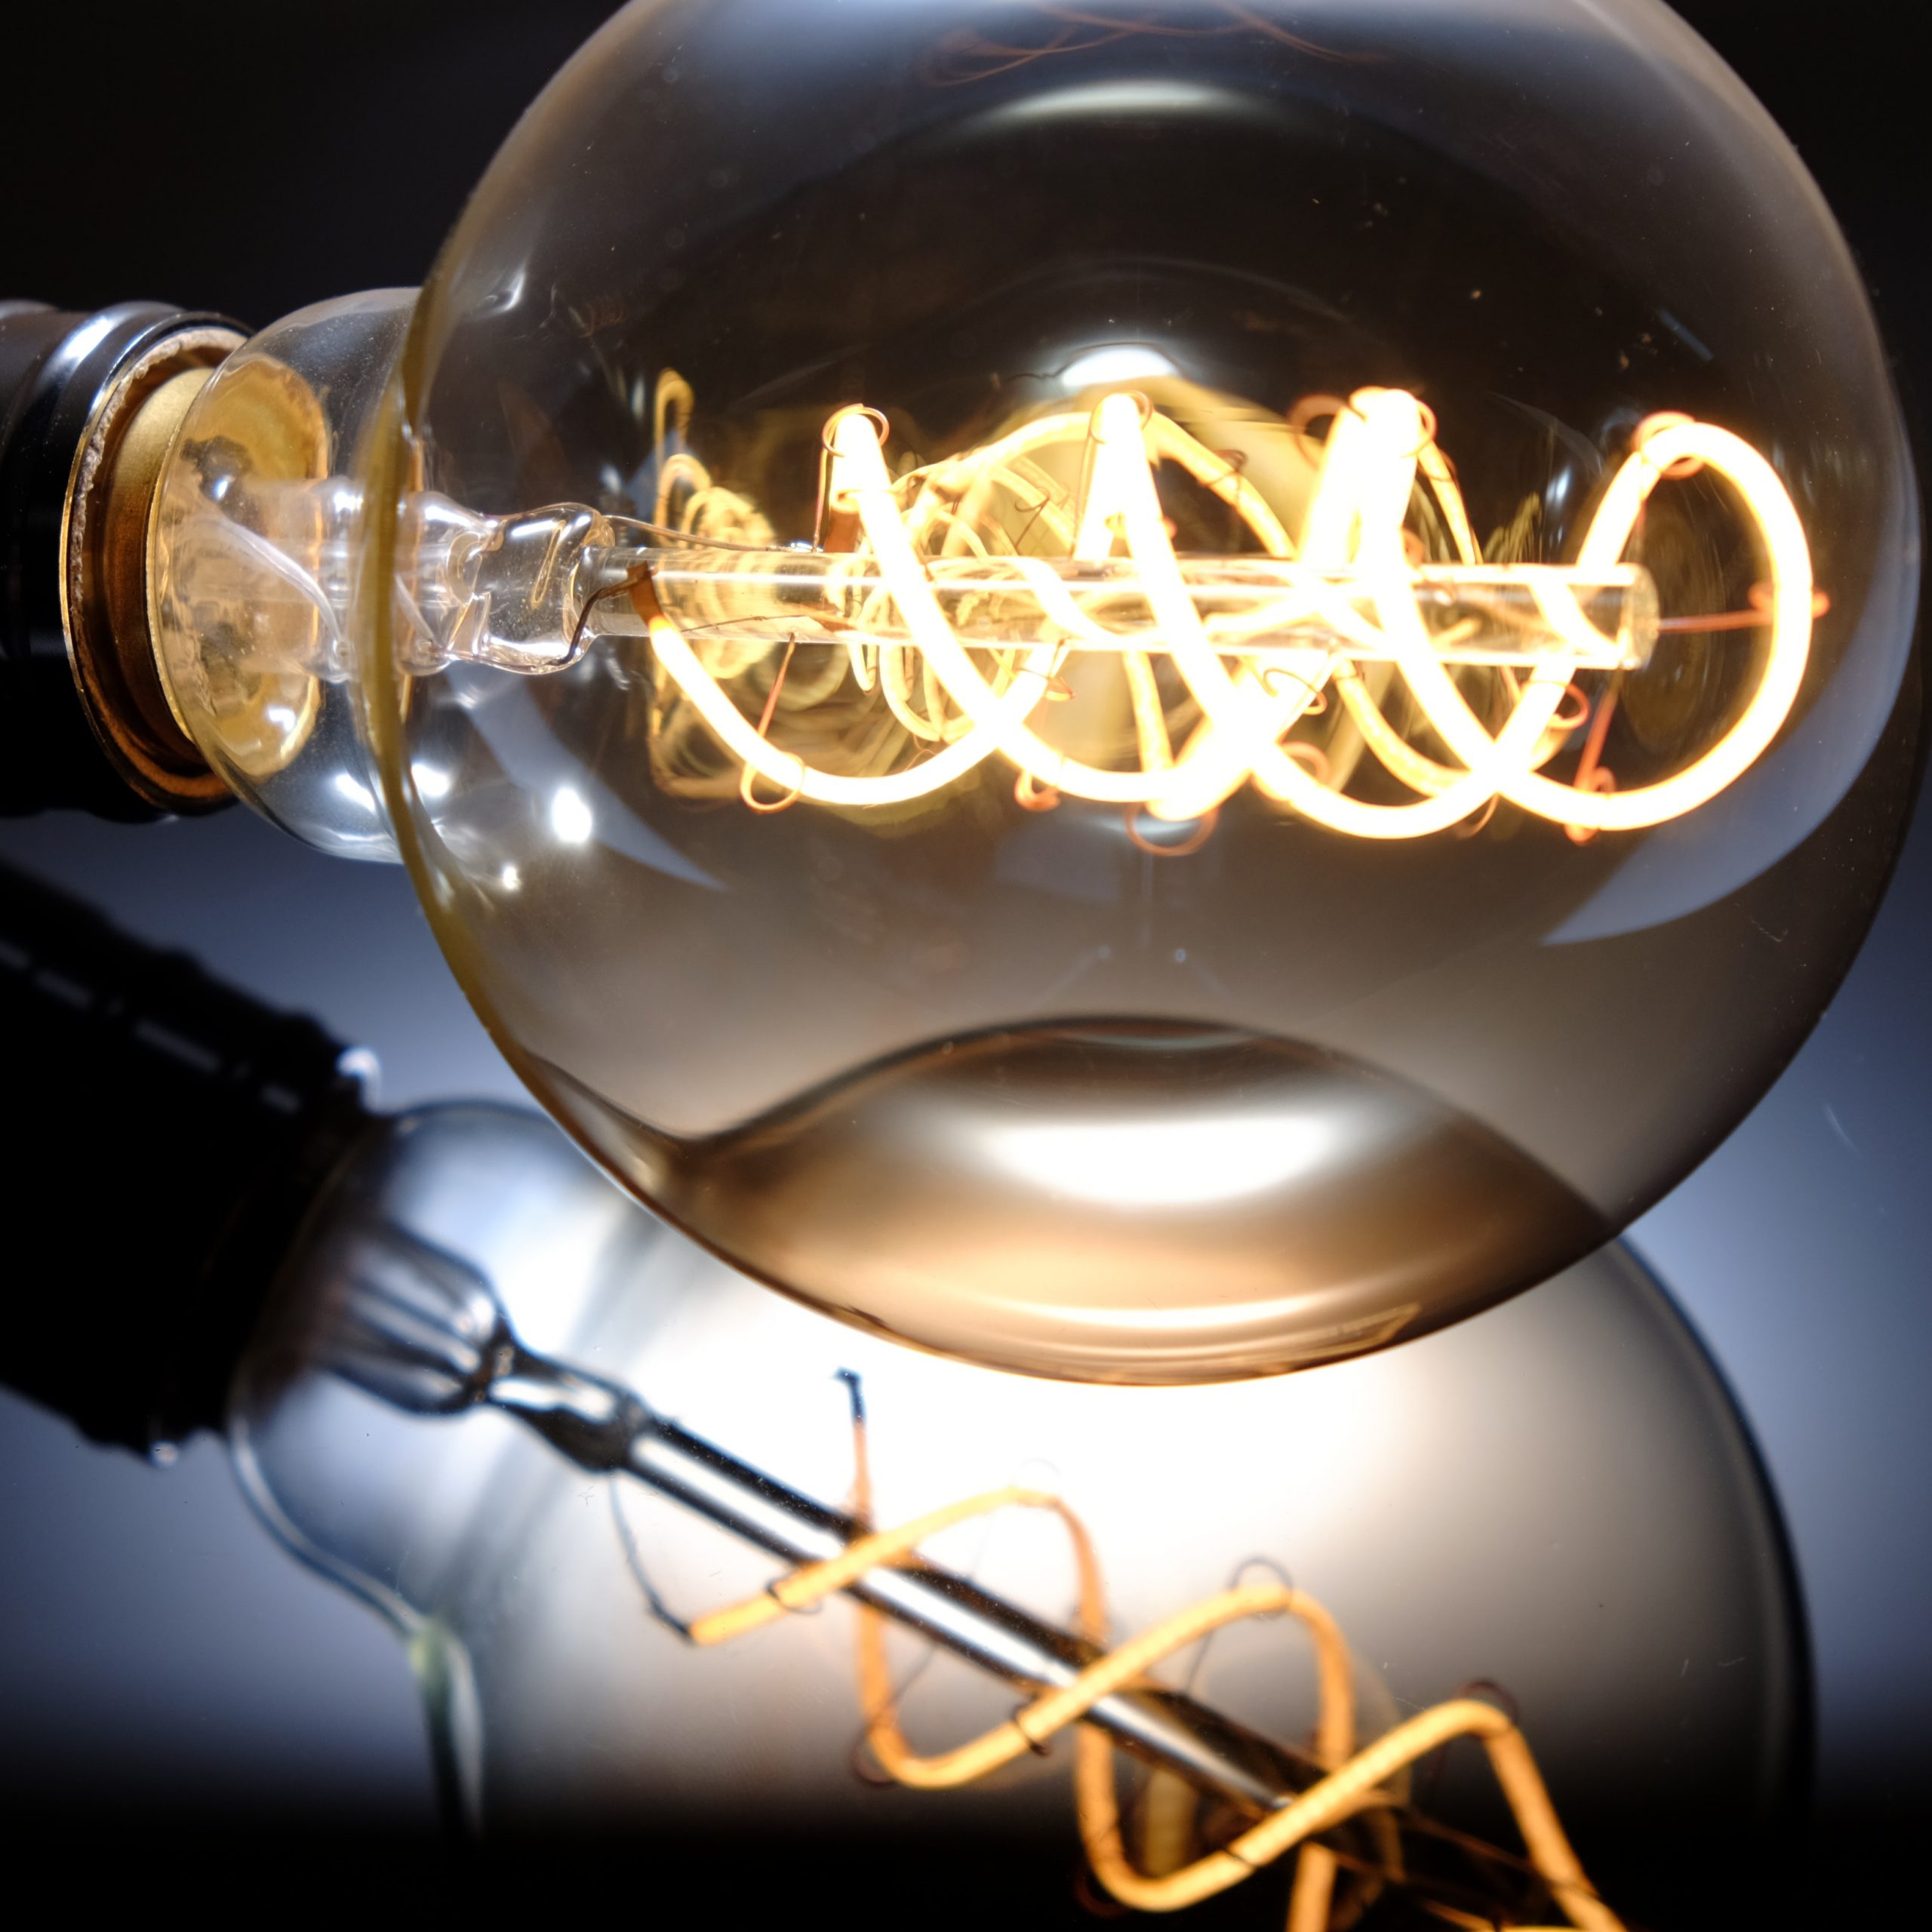 Lightbulb with soft glowing coiled wire.